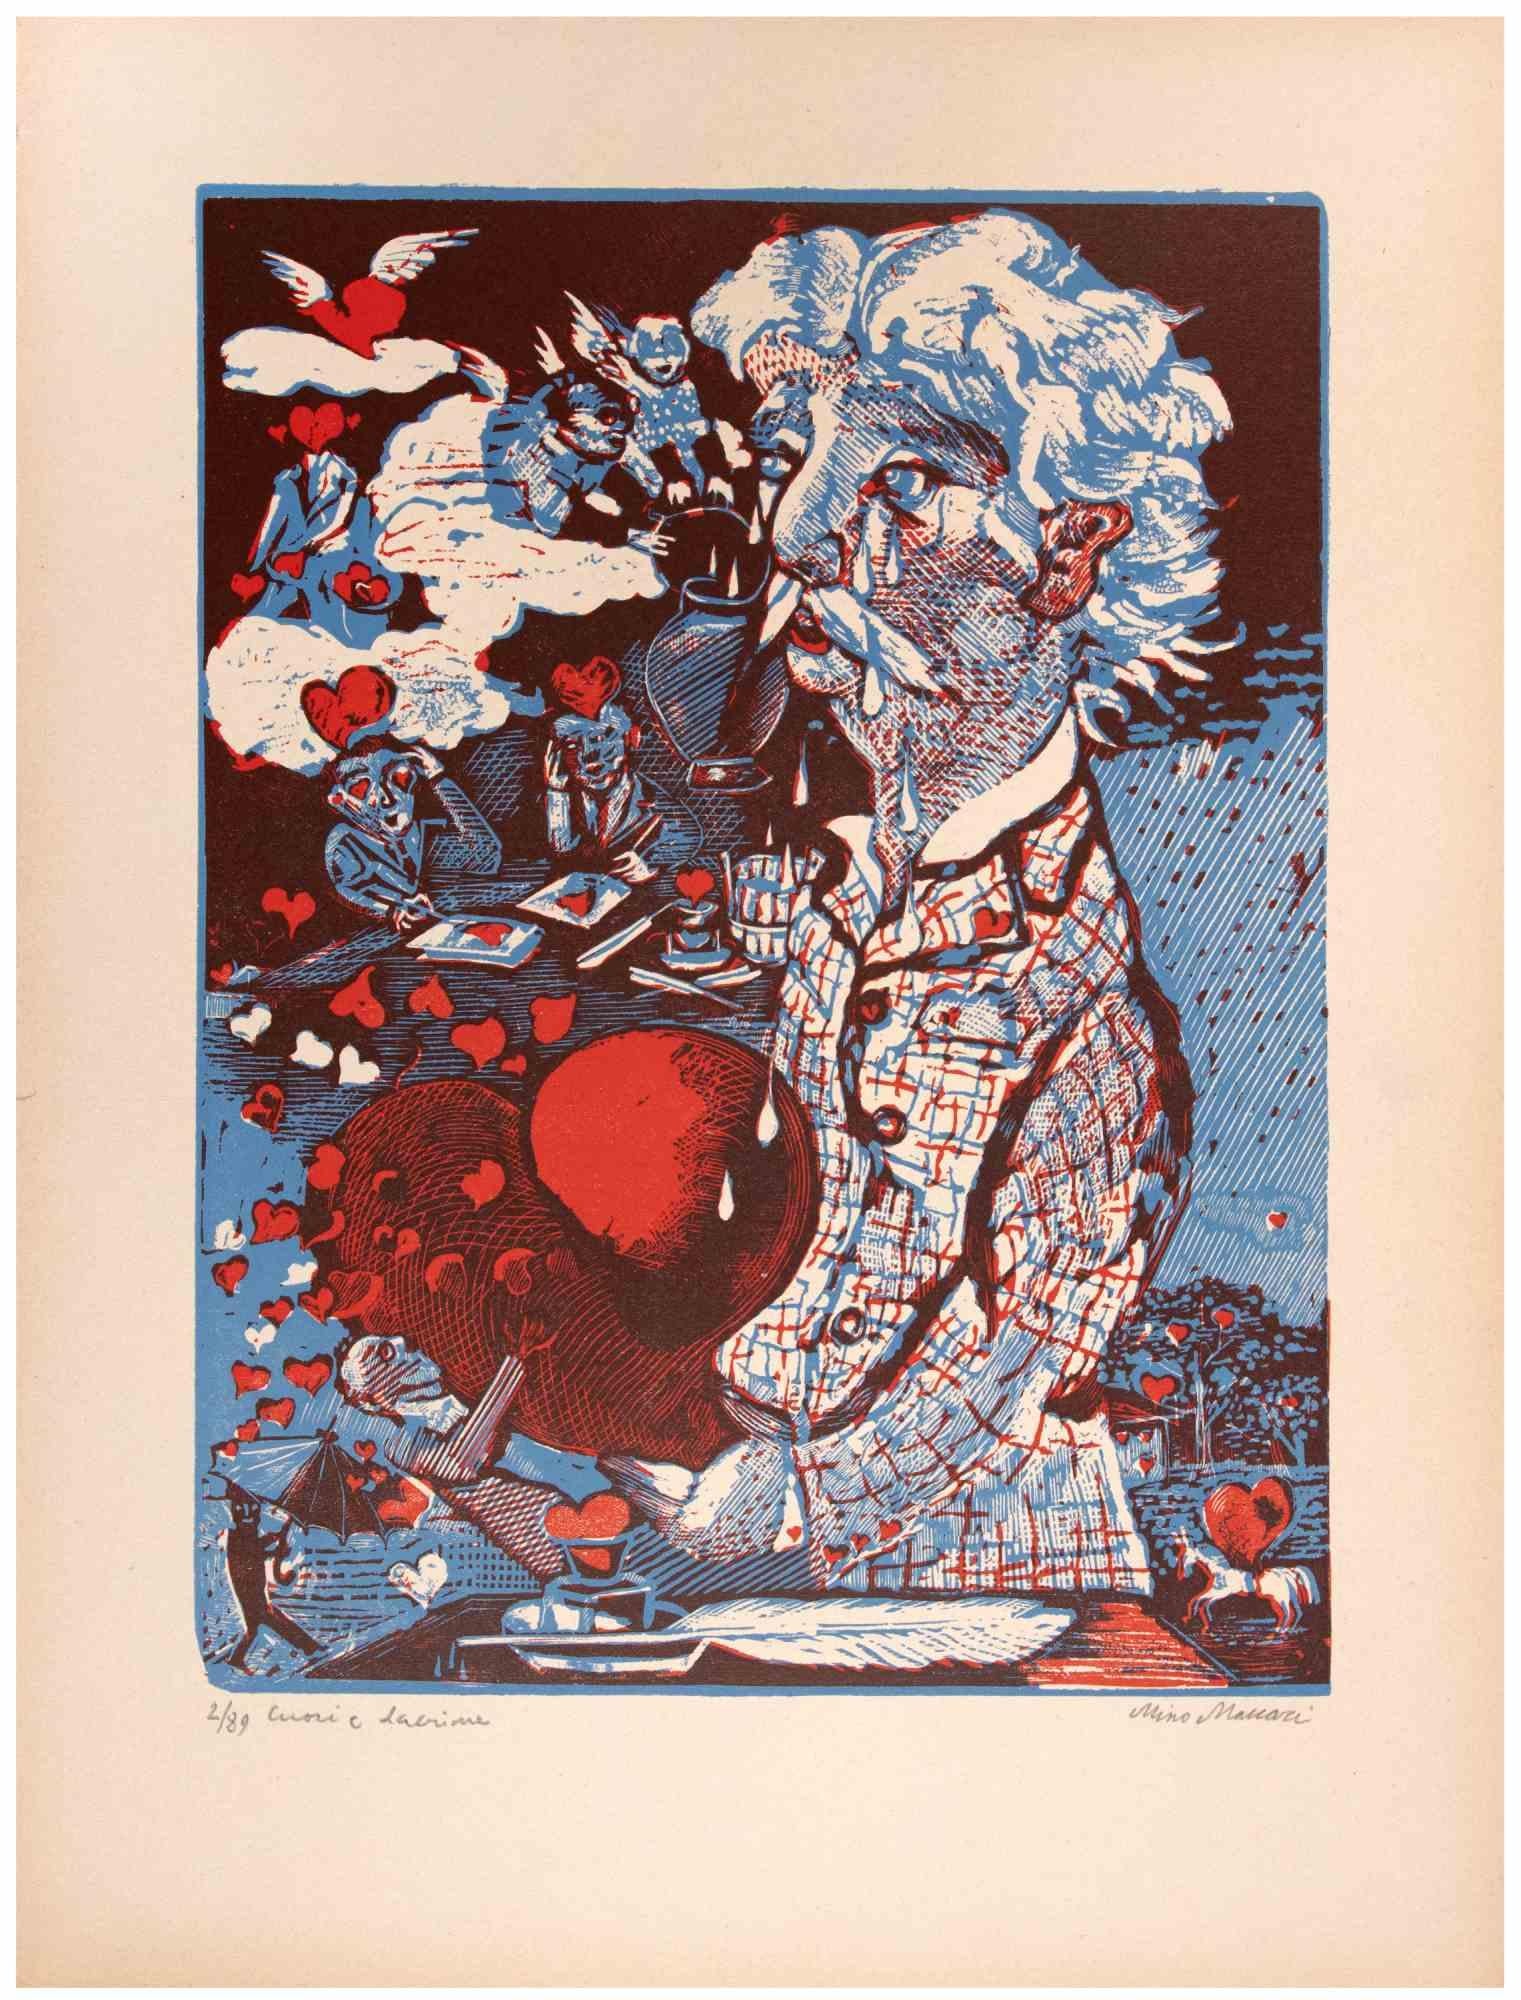 Cuori e Lacrime is an Artwork realized by Mino Maccari  (1924-1989) in the Mid-20th Century.

Colored woodcut on paper. Hand-signed on the lower, numbered 2/89 specimens and titled on the left margin.

Good conditions.

Mino Maccari (Siena,